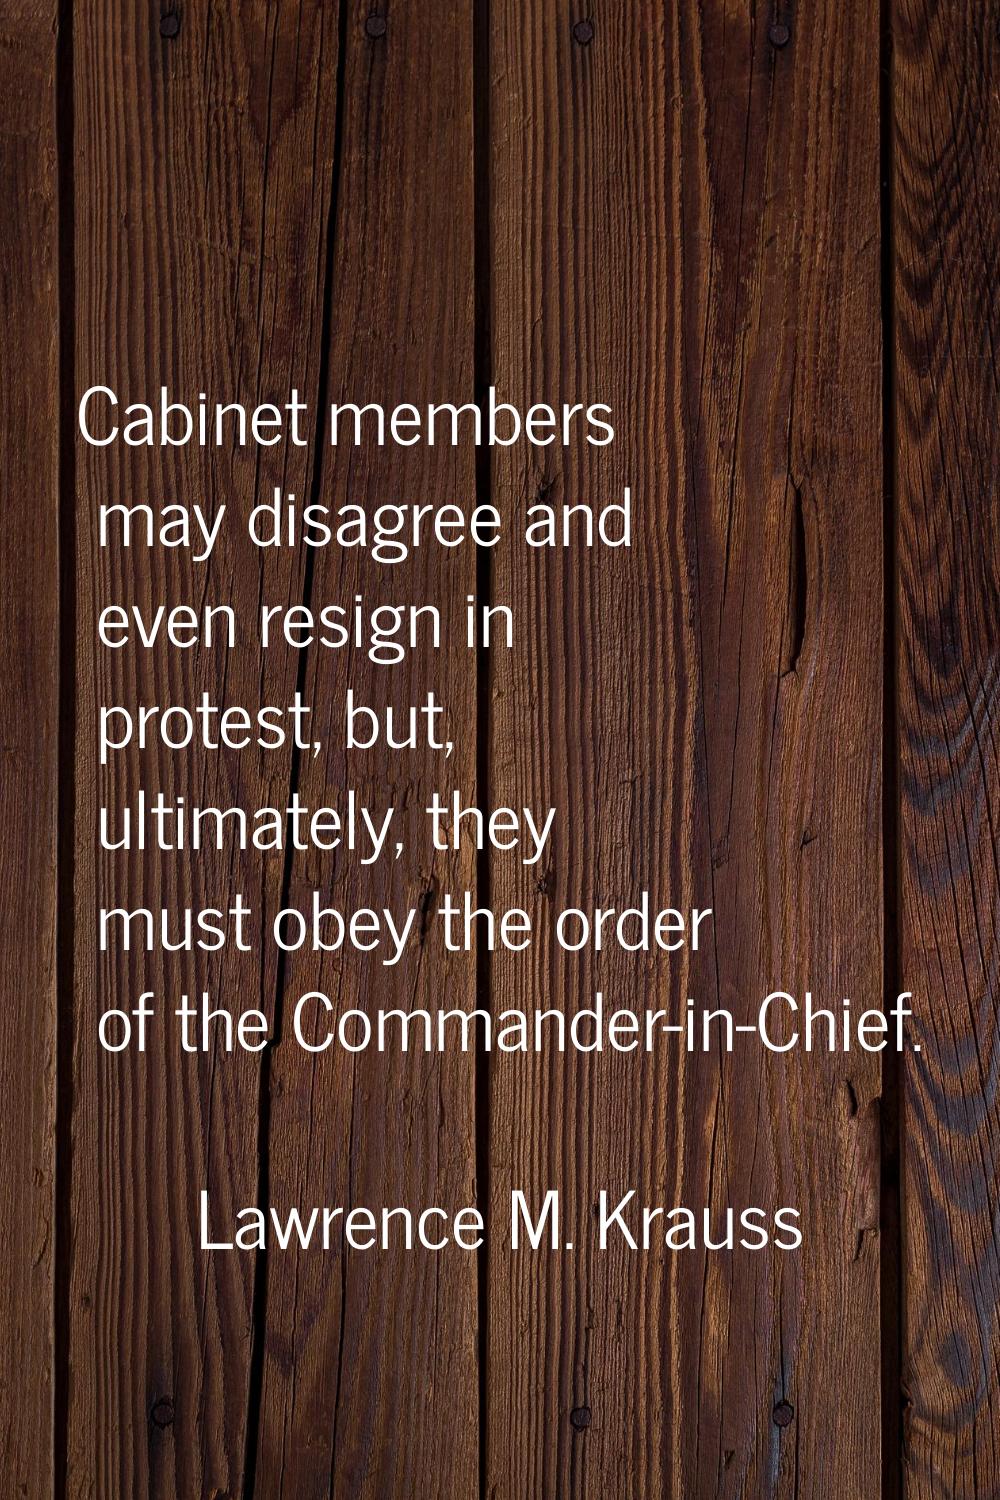 Cabinet members may disagree and even resign in protest, but, ultimately, they must obey the order 